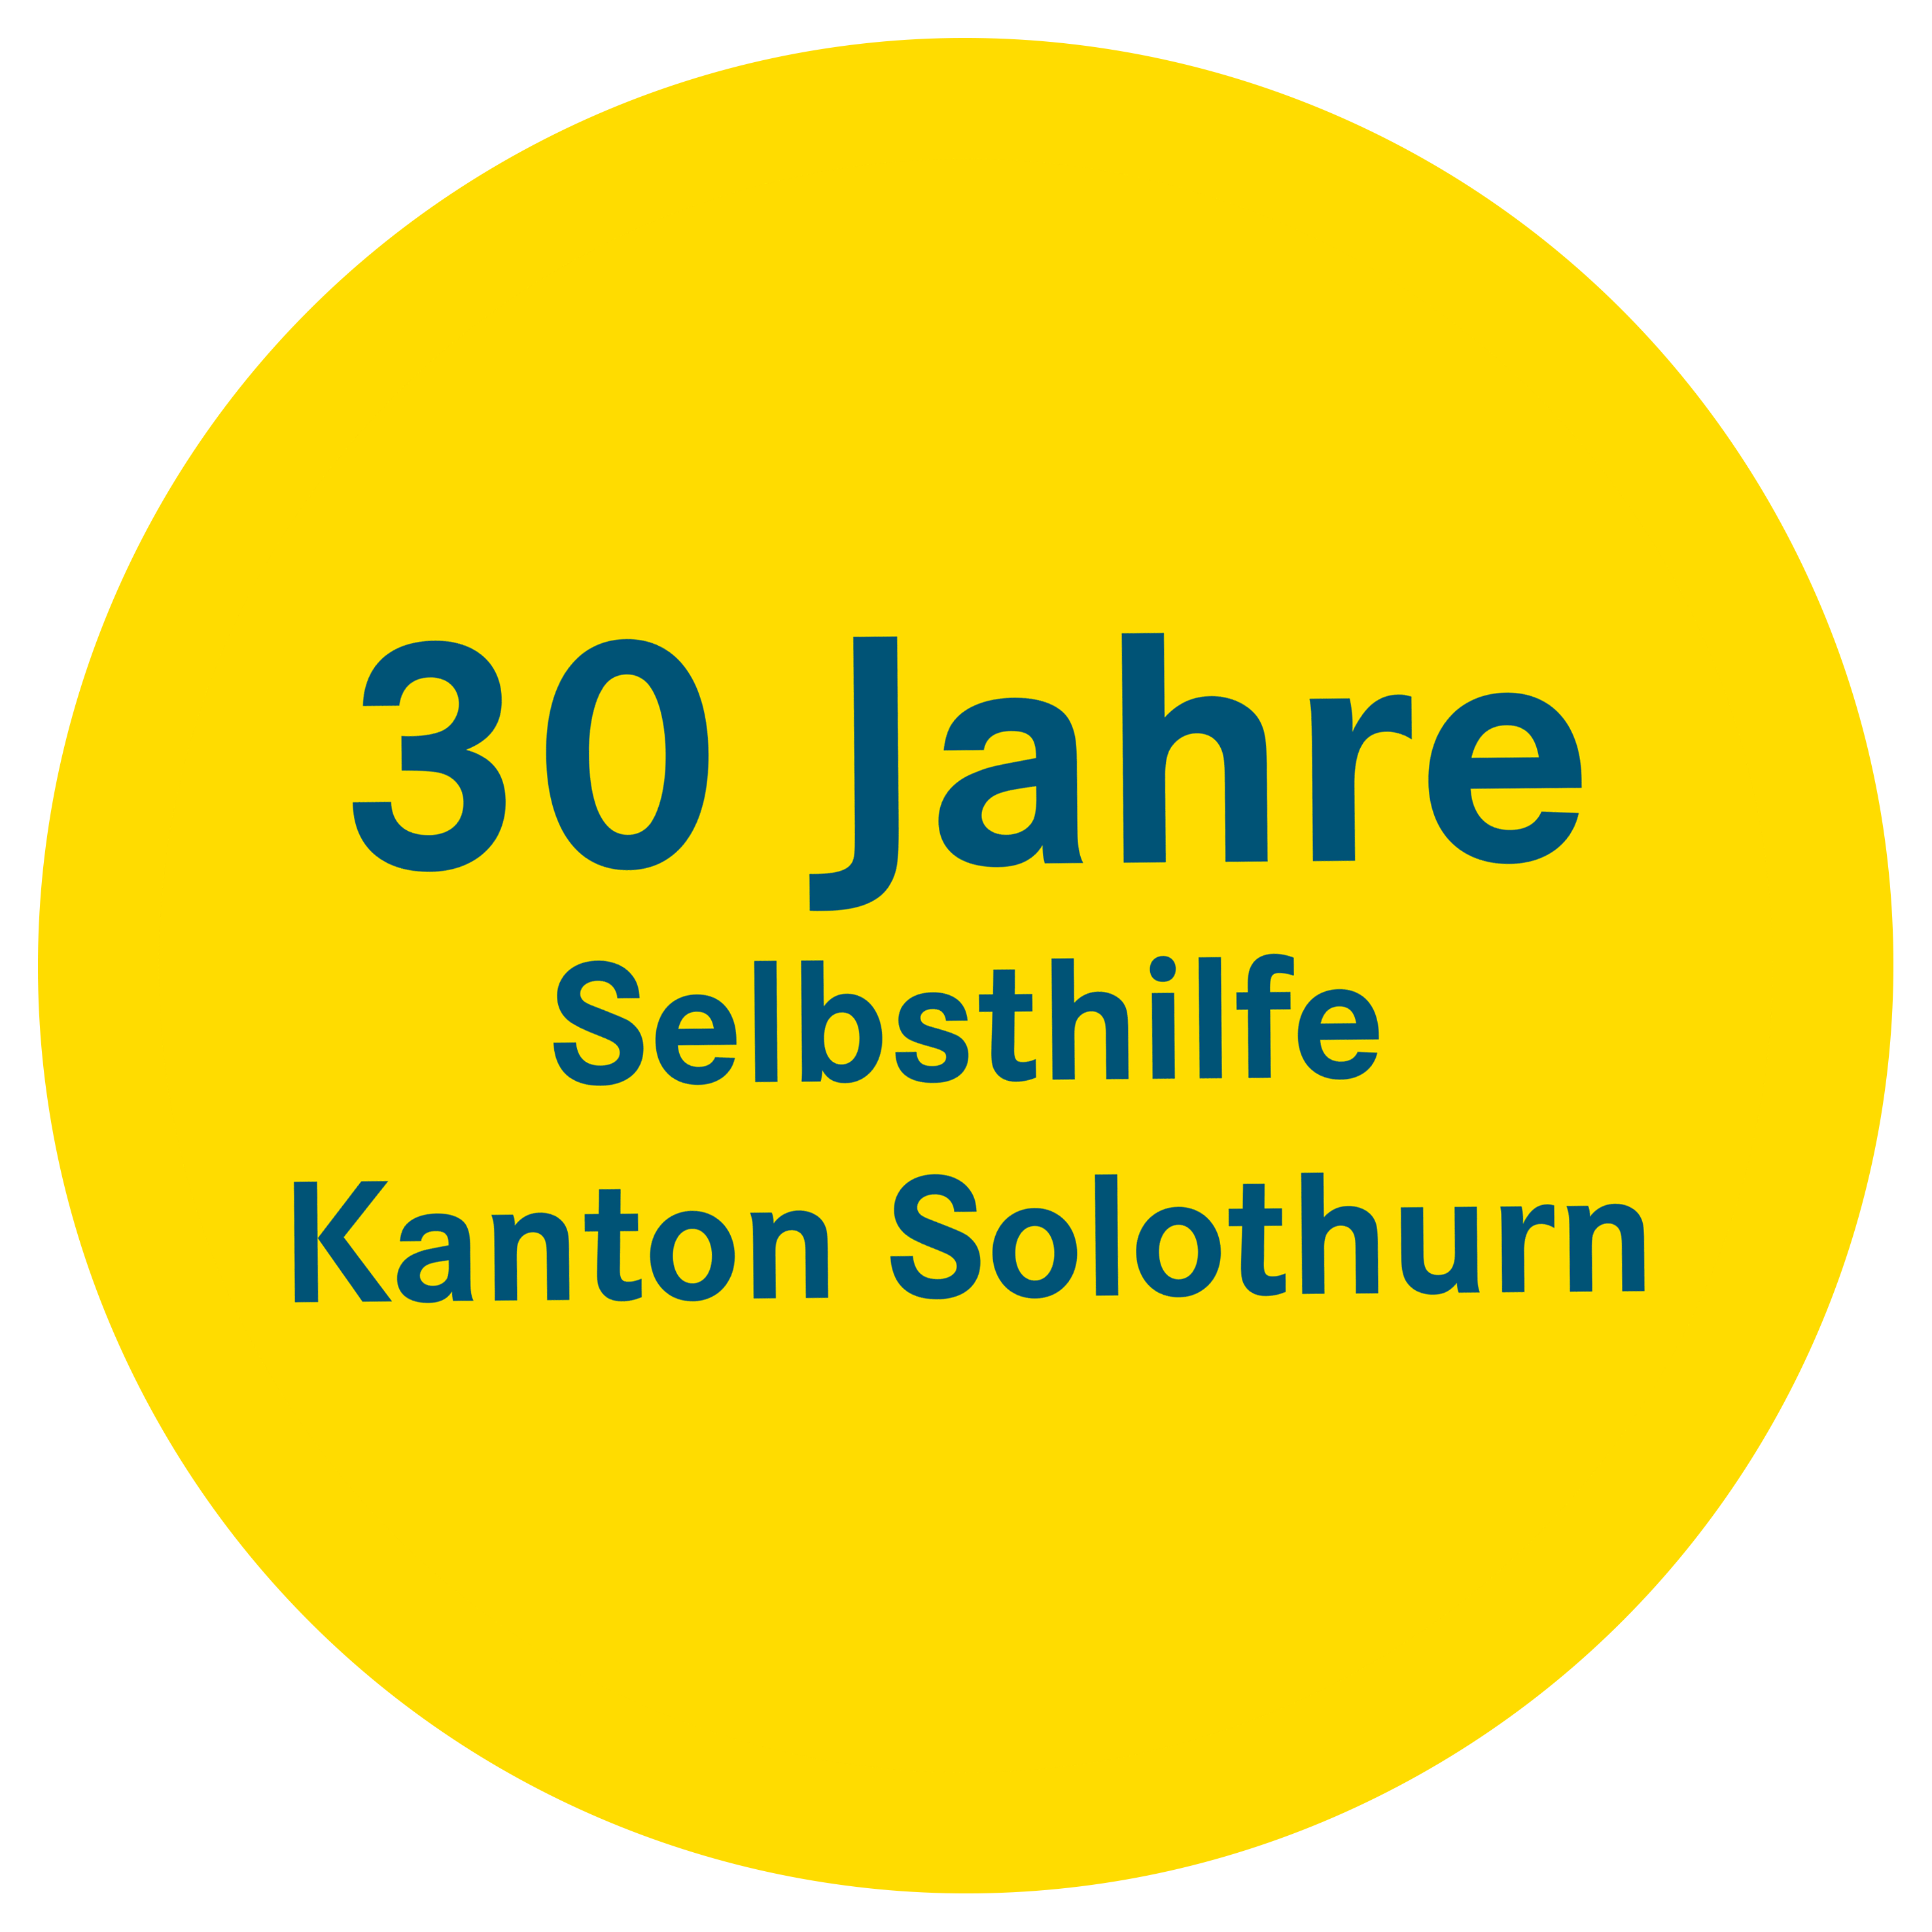 30 Jahre Selbsthilfe Solothurn